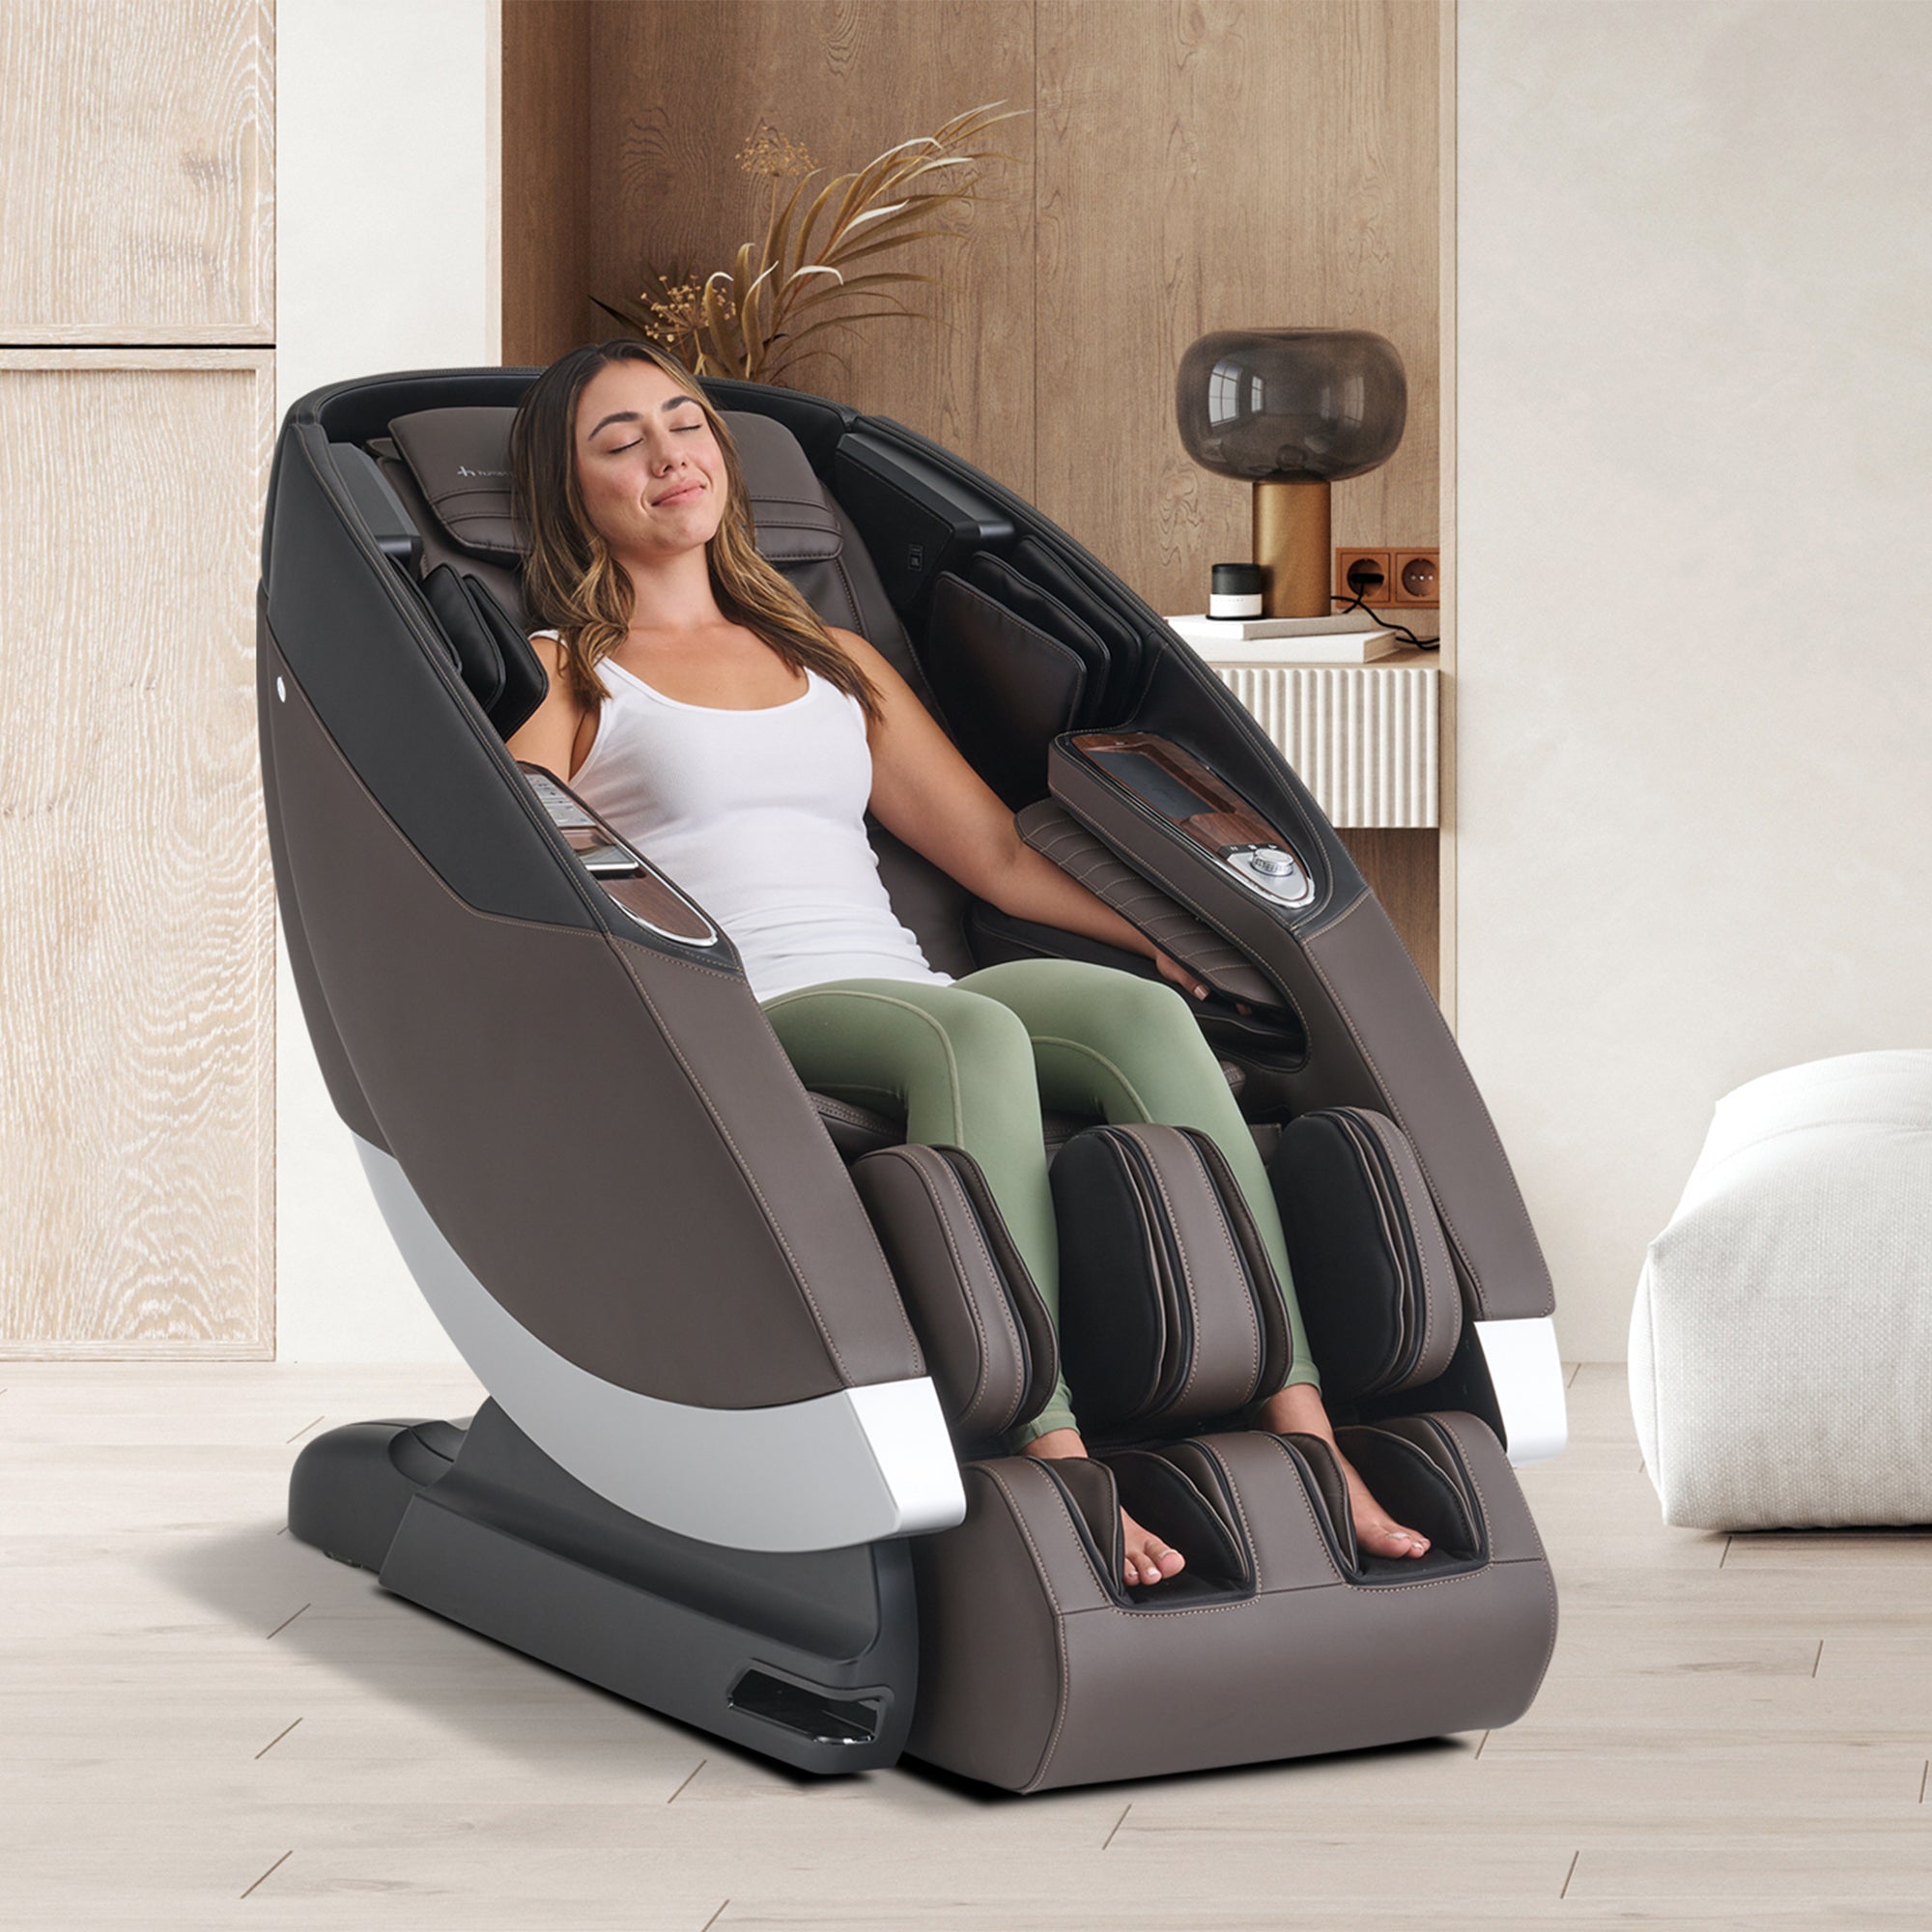 Shop Massage Chairs - Relax The Back